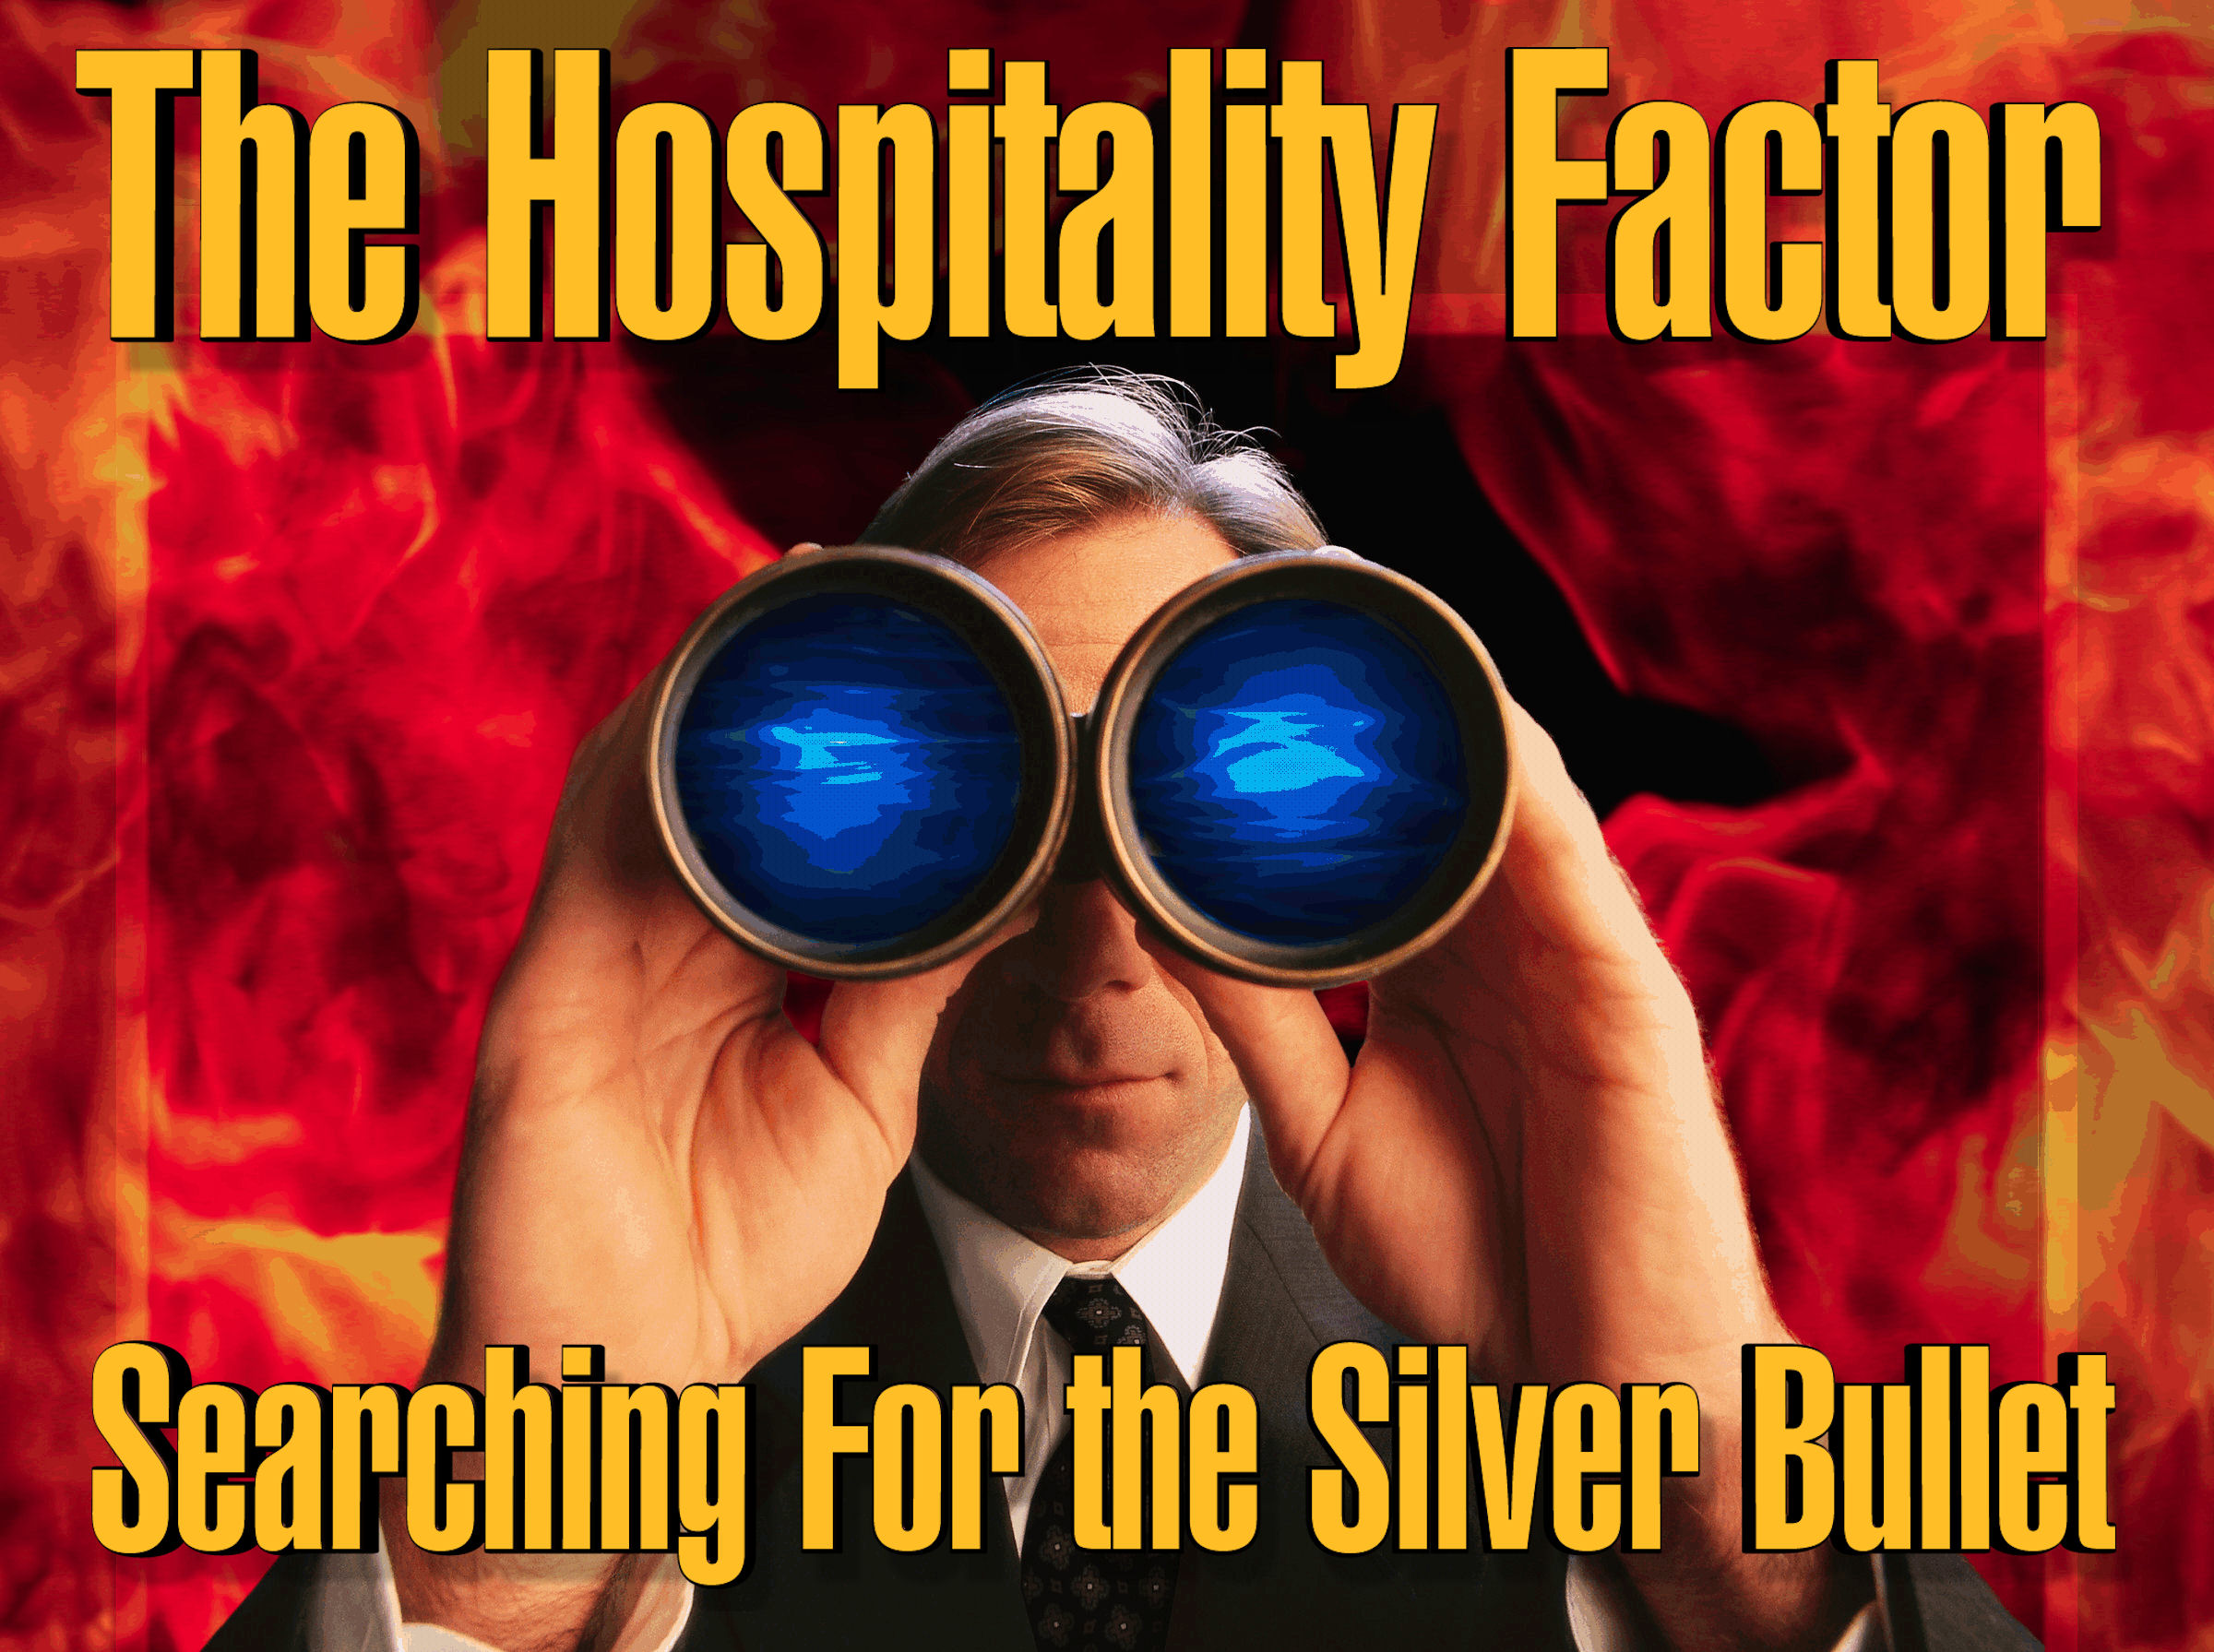 The Hospitality Factor